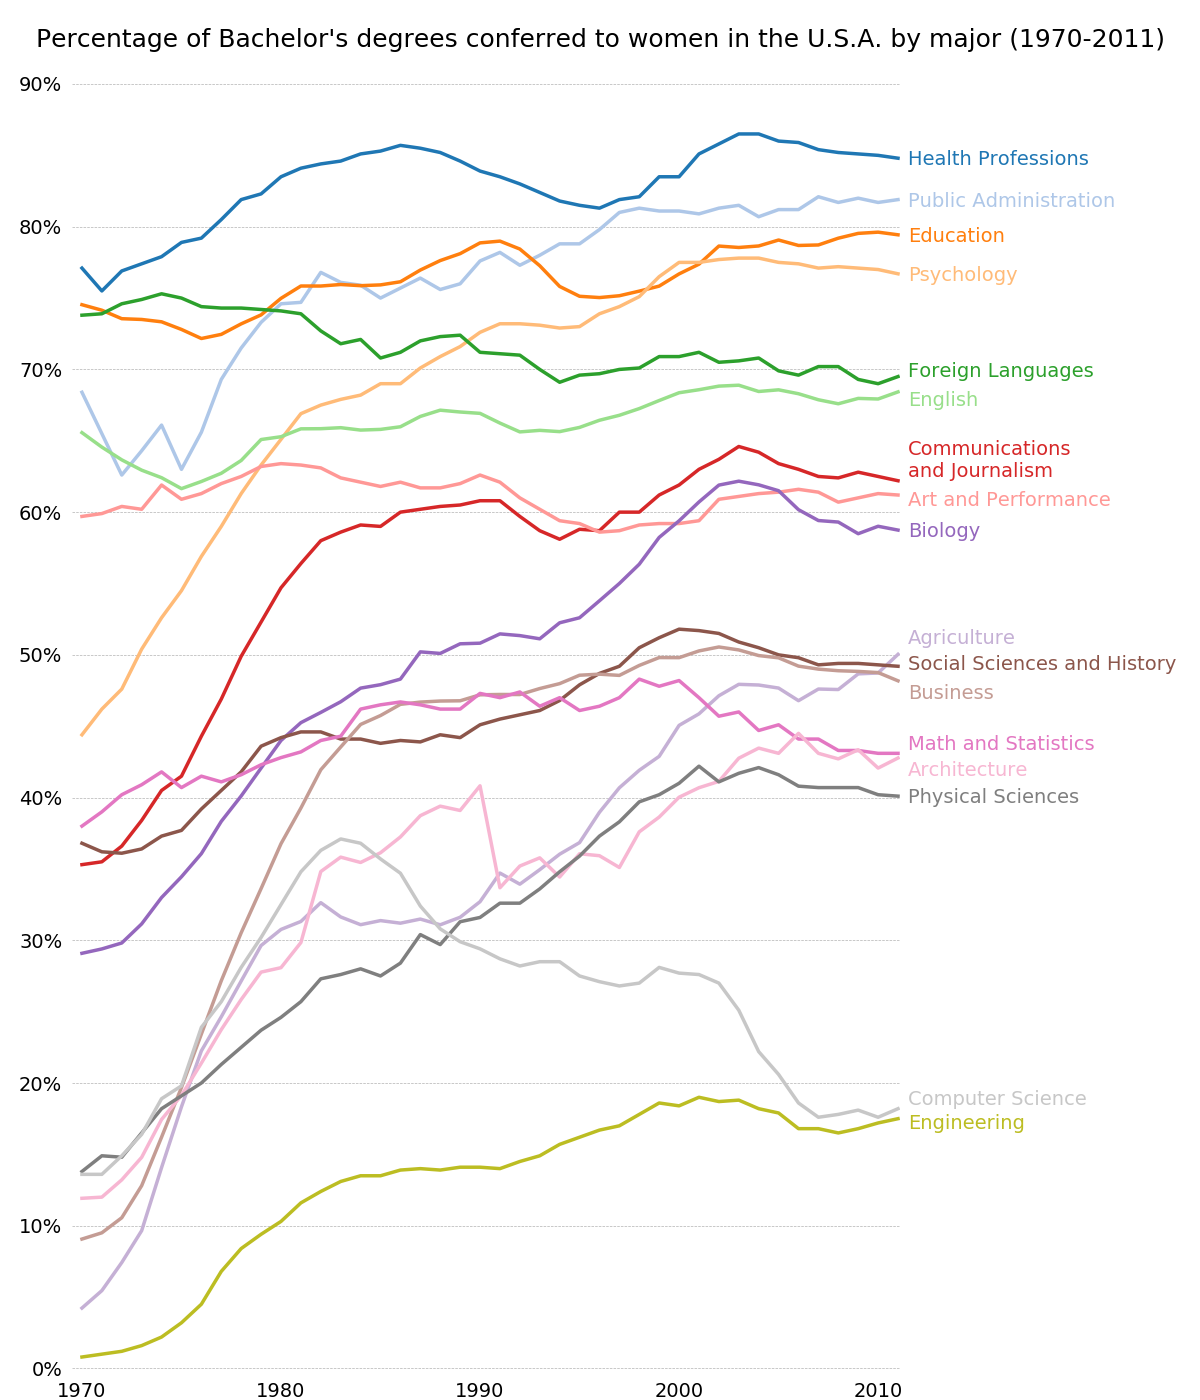 ../../_images/sphx_glr_bachelors_degrees_by_gender_001.png